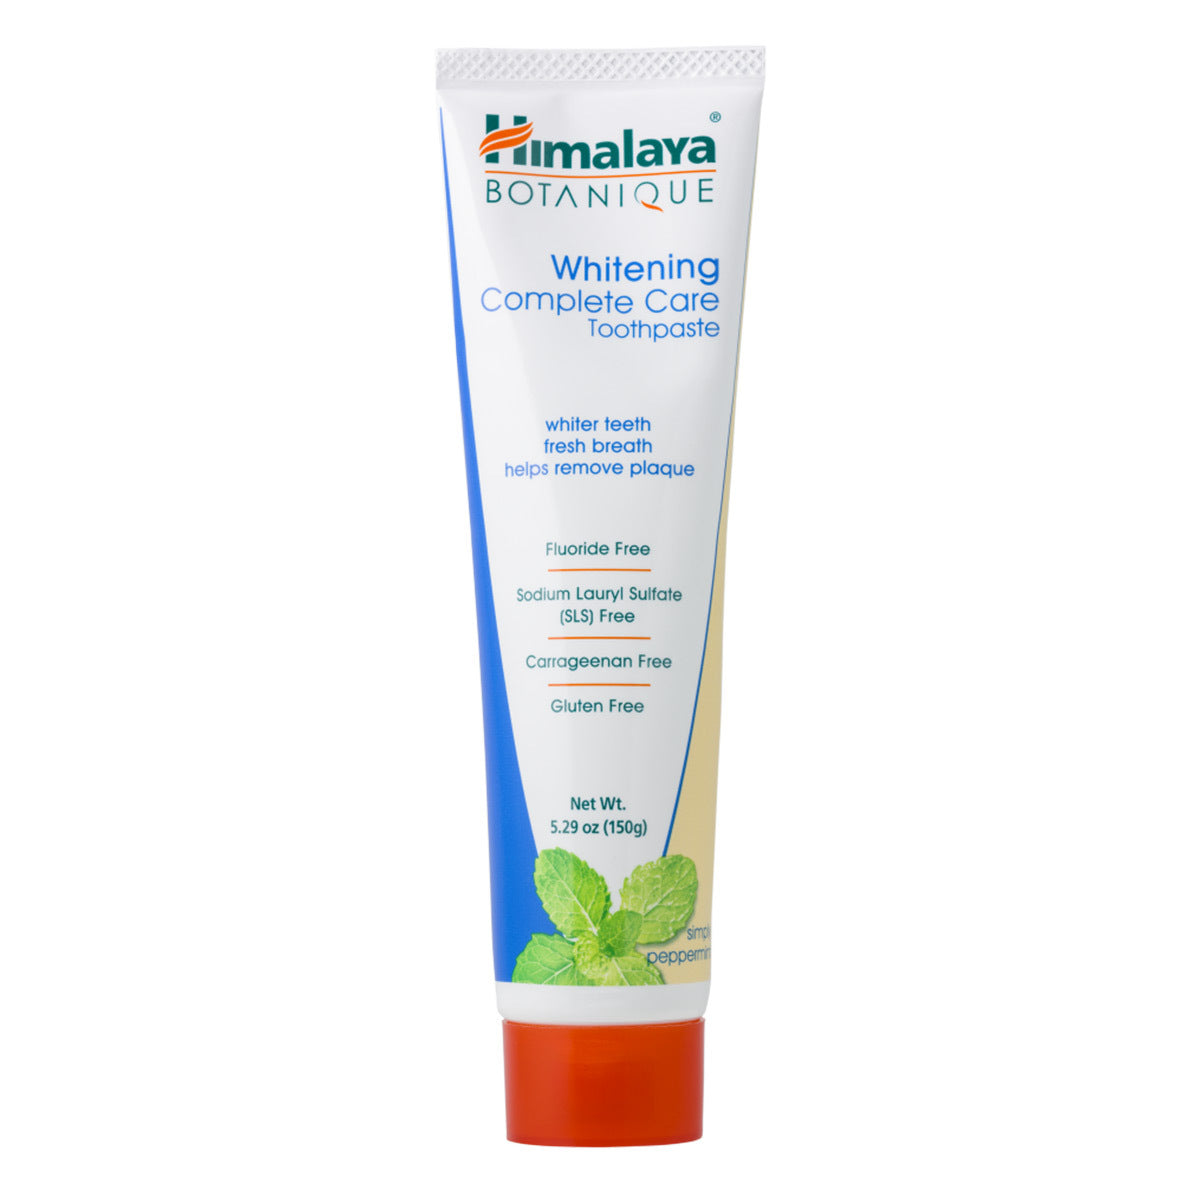 Primary image of Whitening Complete Care Simply Peppermint Toothpaste